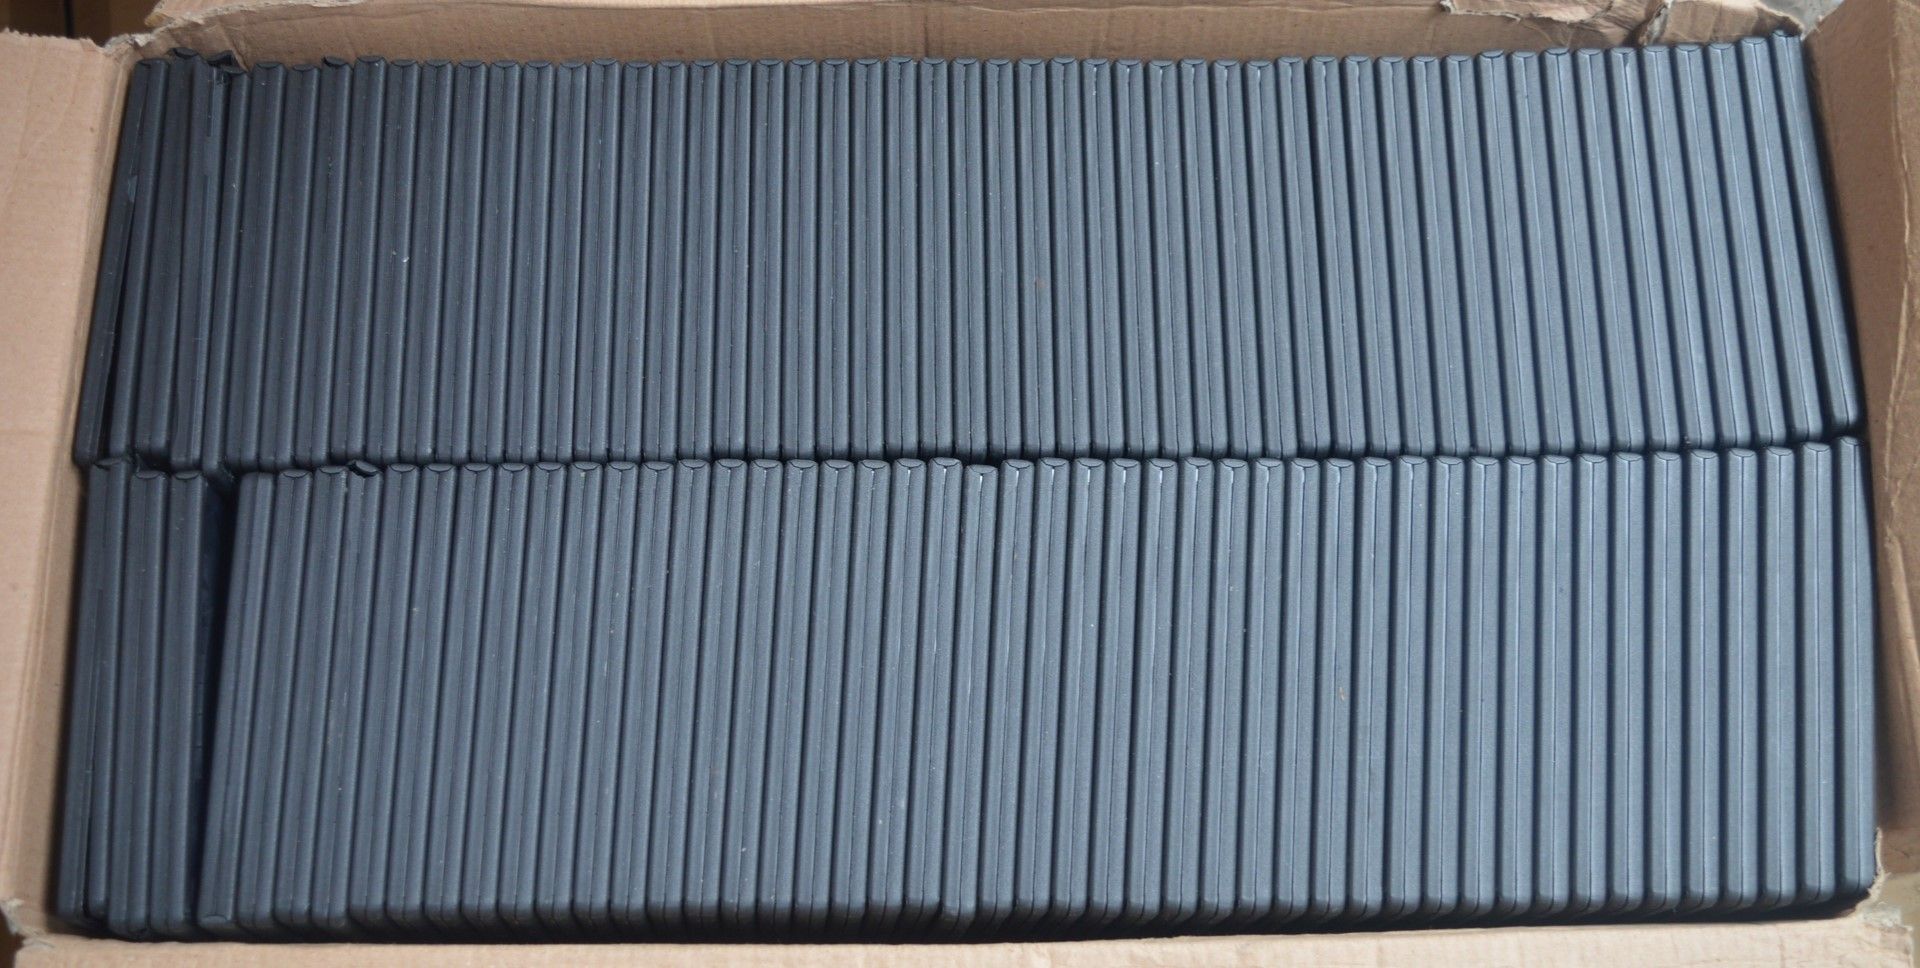 100 x Half Size Single Disc Slimline CD DVD Cases - Brand New Stock - Only 10mm Thick - CL089 - Ref - Image 2 of 4